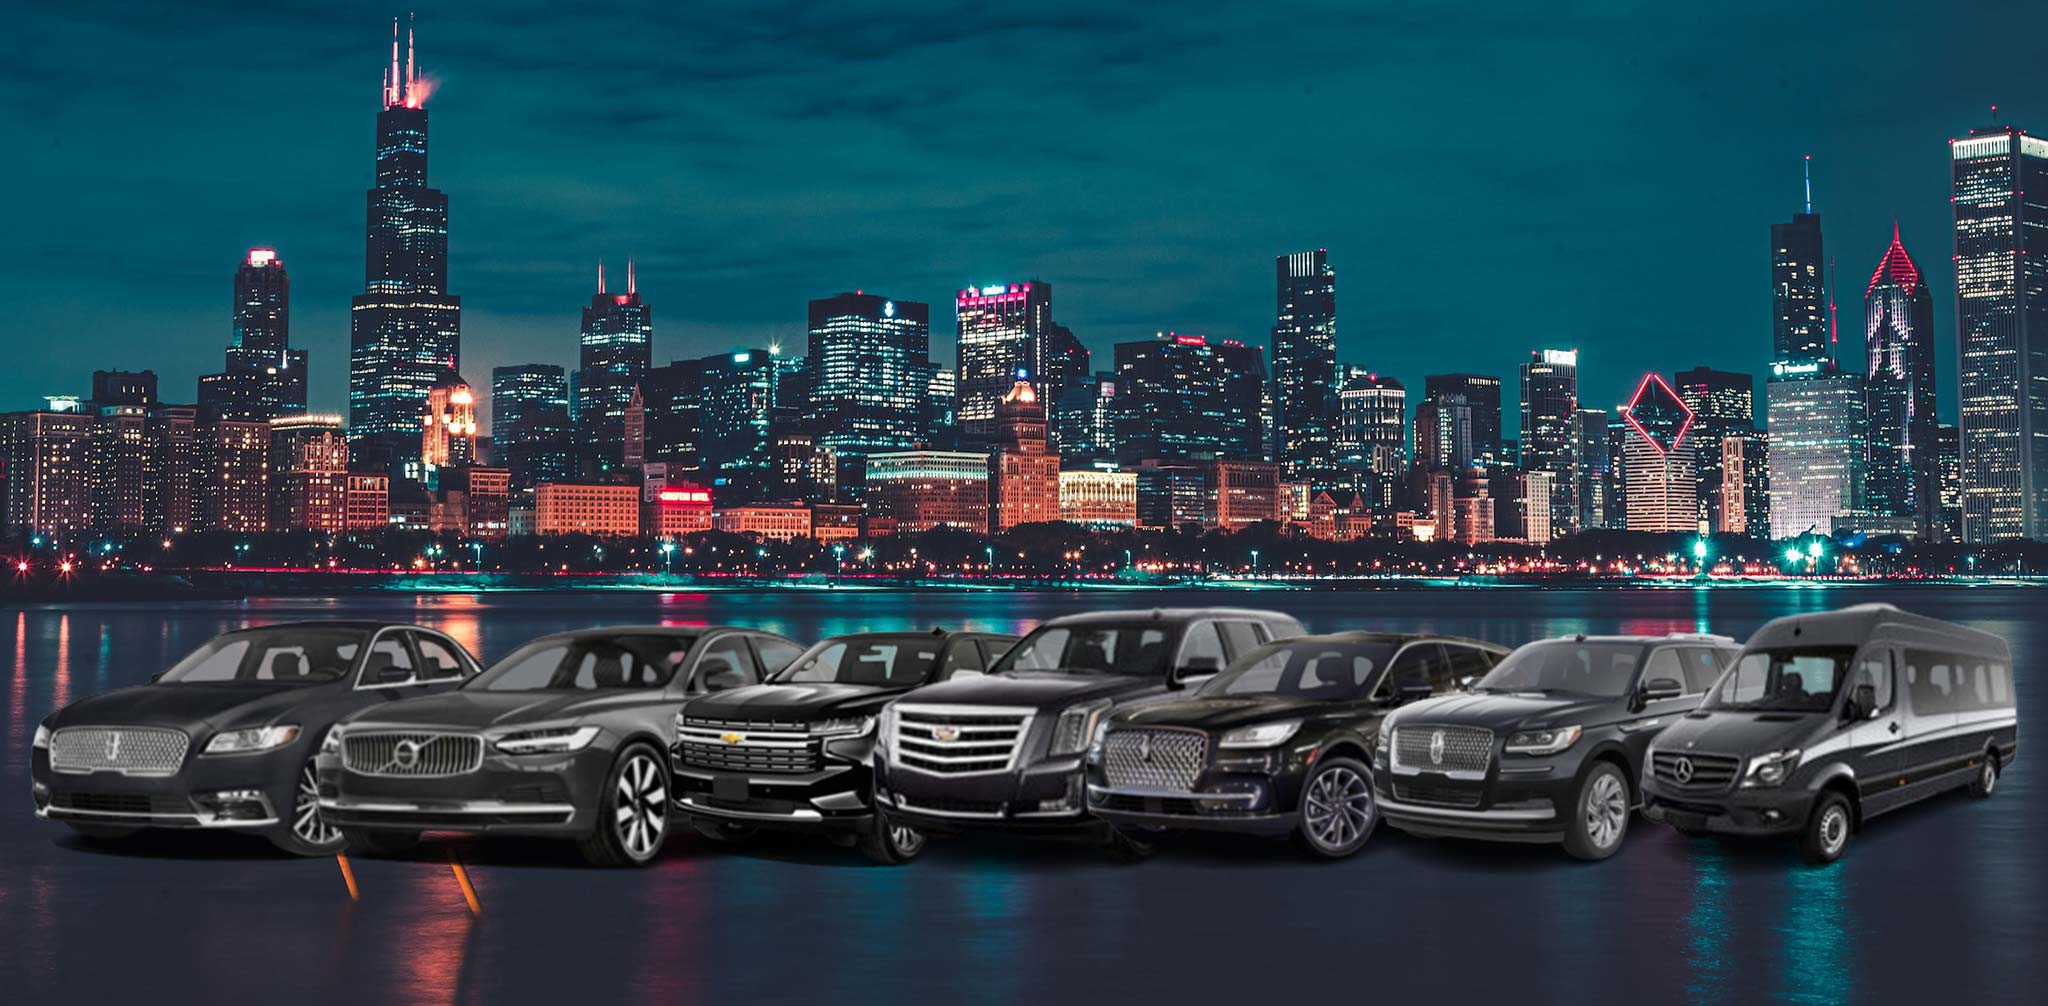 Global Limo Services Chicago and nearby